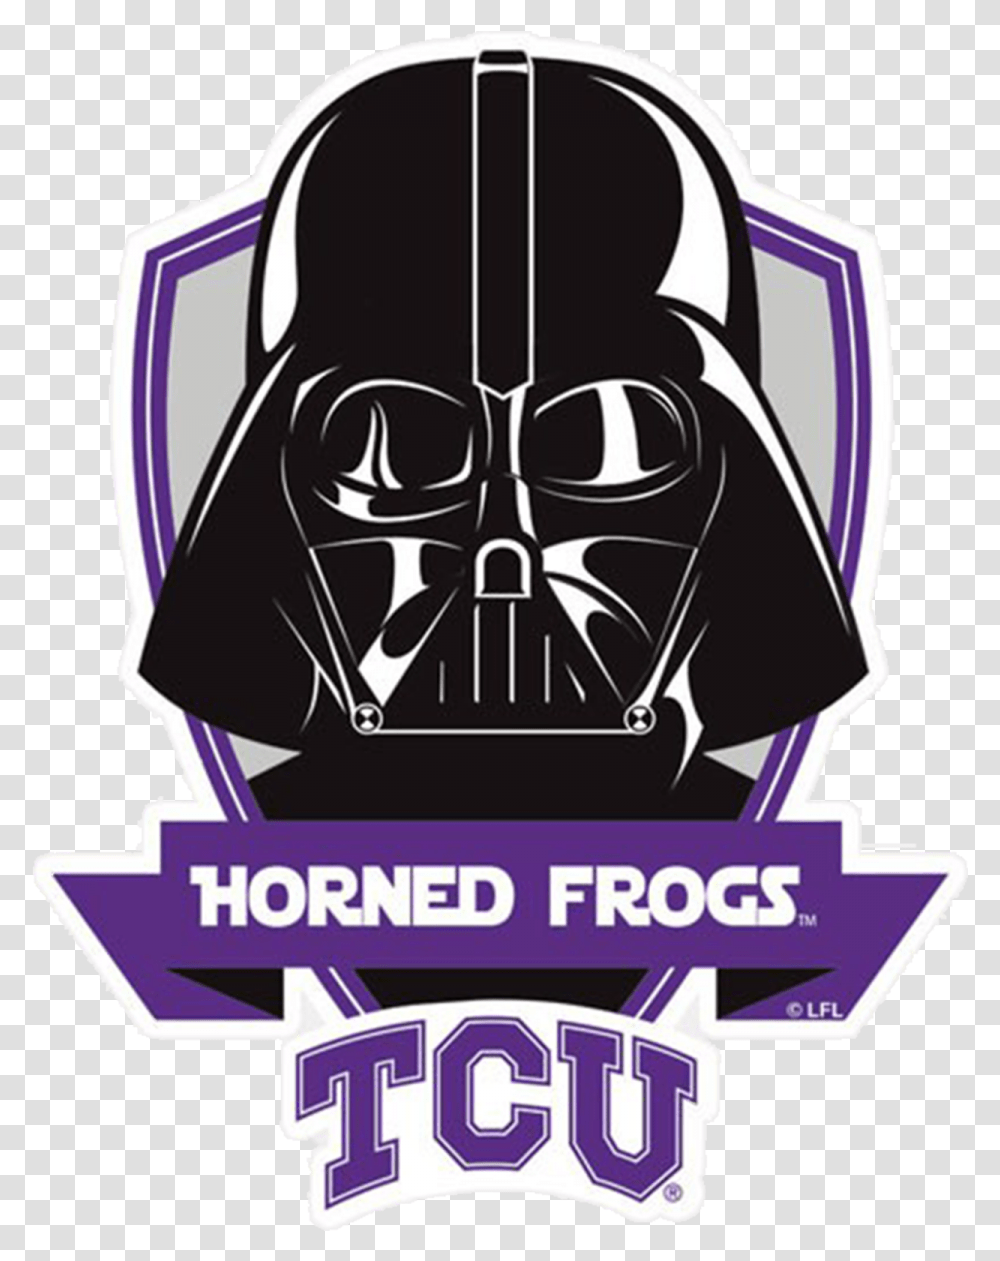 Tcu Horned Frogs Ncaa Darth Vader Star Wars Logo Perfect Porta Pasaporte Star Wars, Armor, Shield Transparent Png